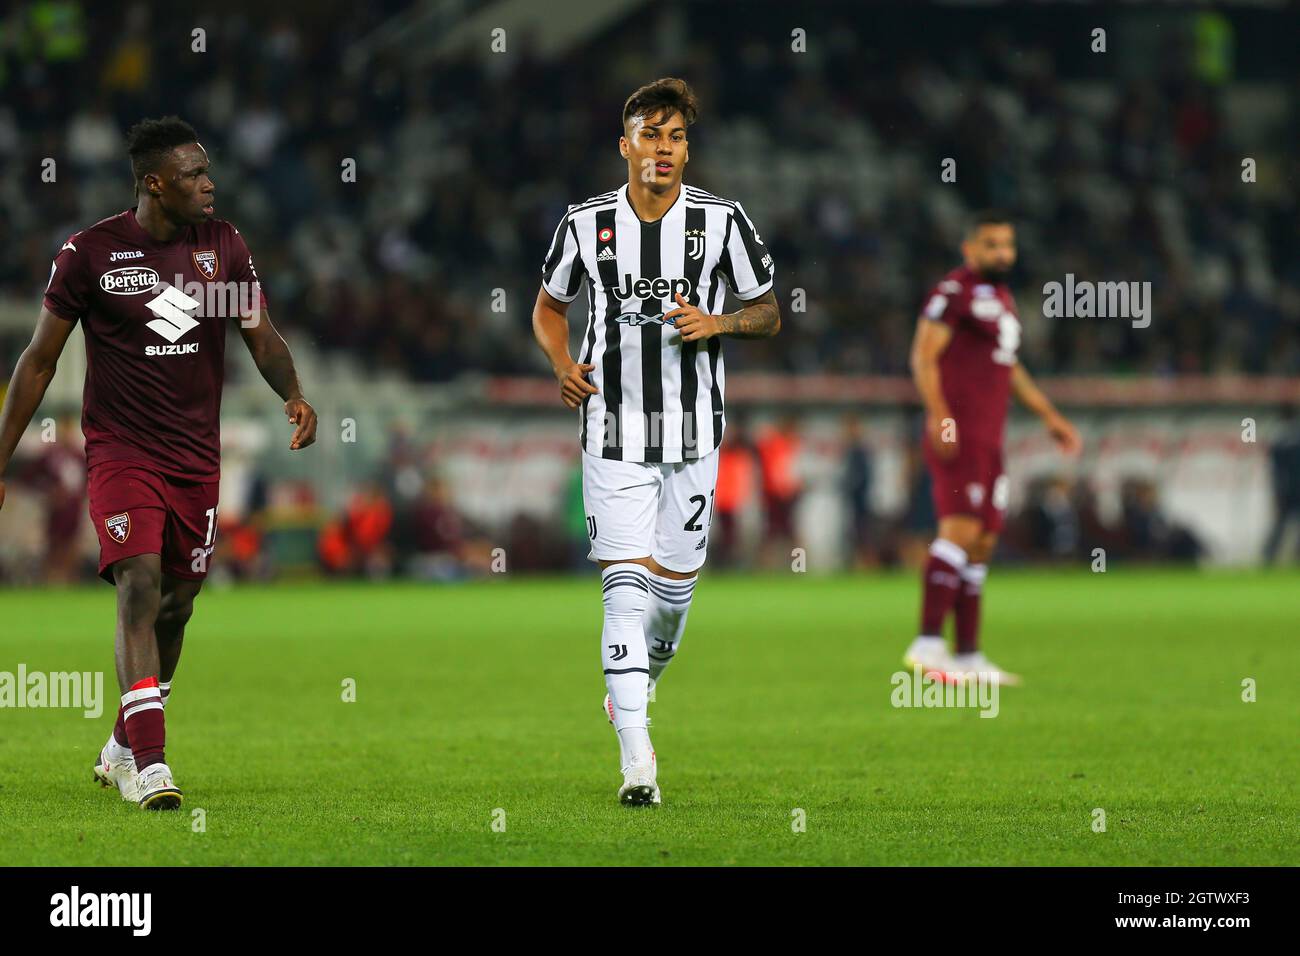 TURIN, ITALY. 02 OCTOBER 2021. Kaio Jorge of Juventus FC during the Serie A match between Torino FC and Juventus FC on 23 September 2021 at Olympic Grande Torino Stadium. Credit: Massimiliano Ferraro/Medialys Images/Alamy Live News Stock Photo